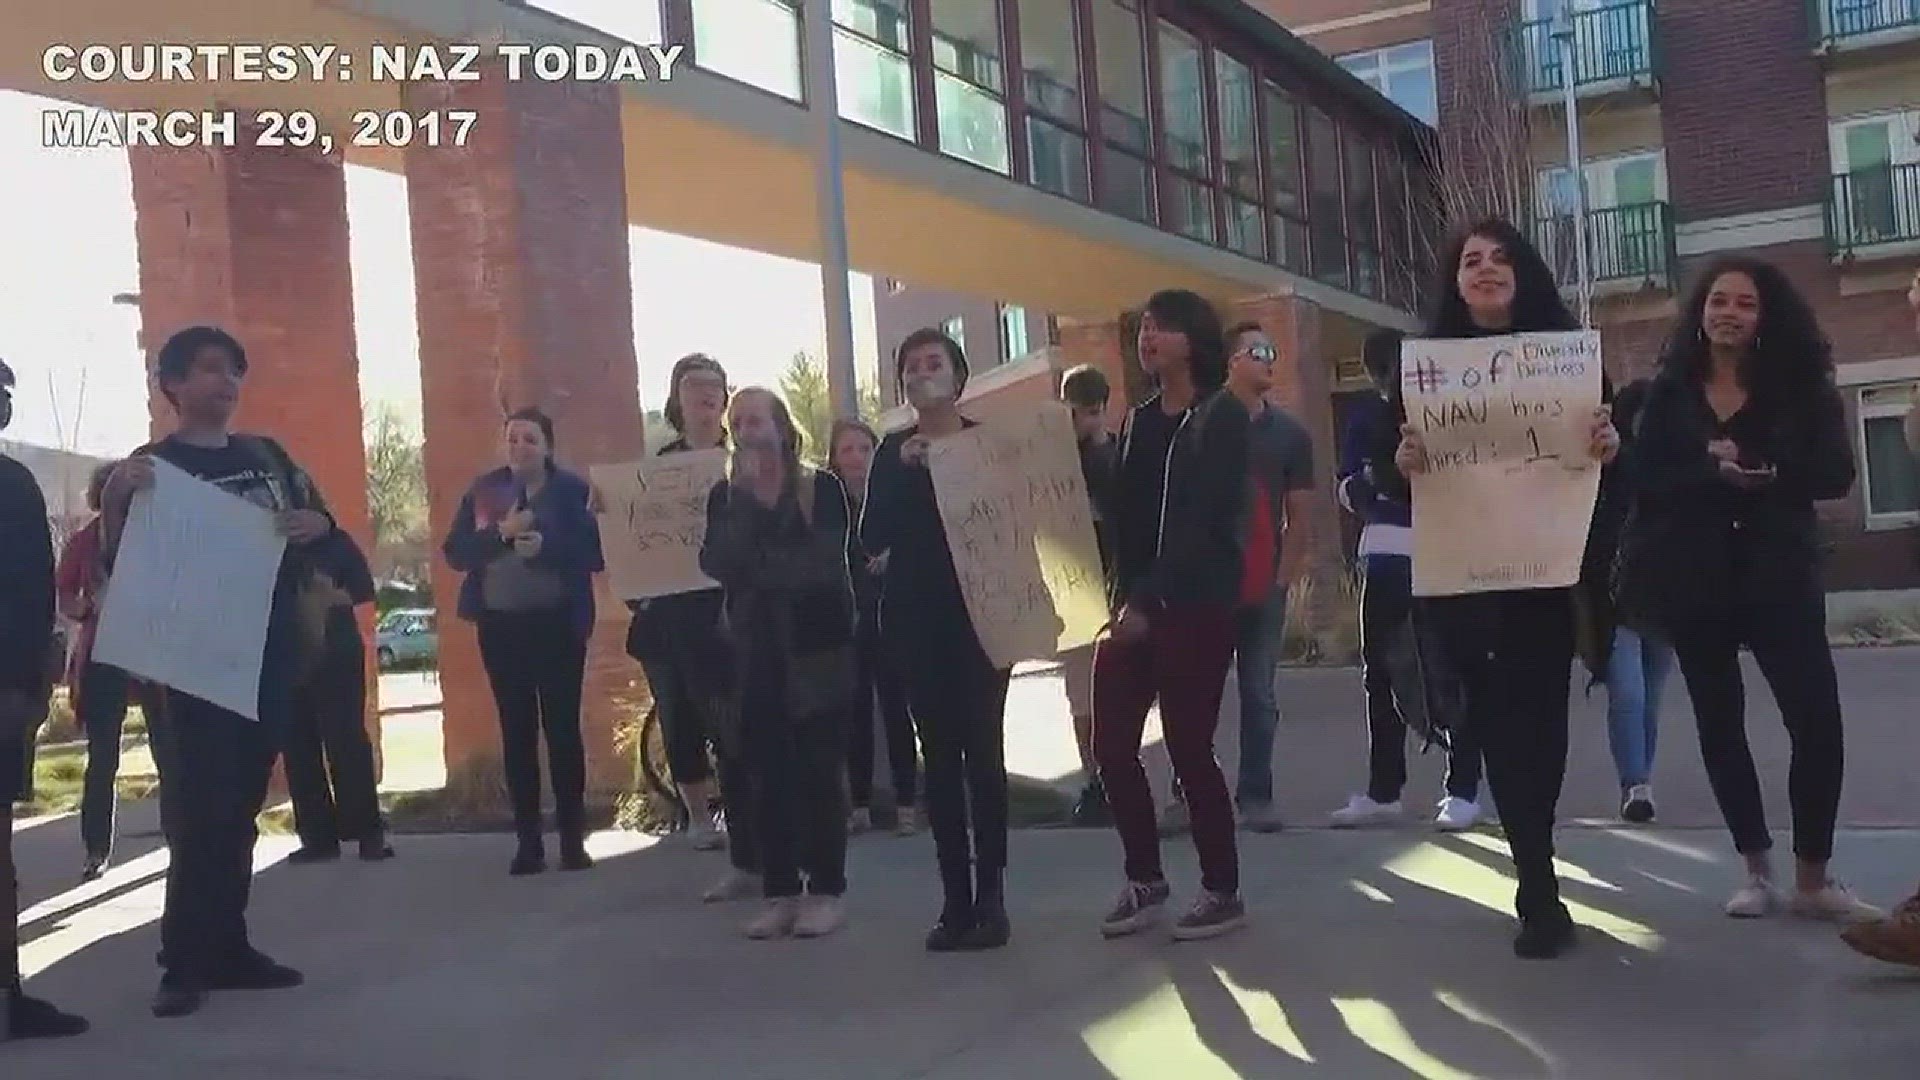 An uproar at NAU where students are demanding school officials take action in regards to hate speech and racism.